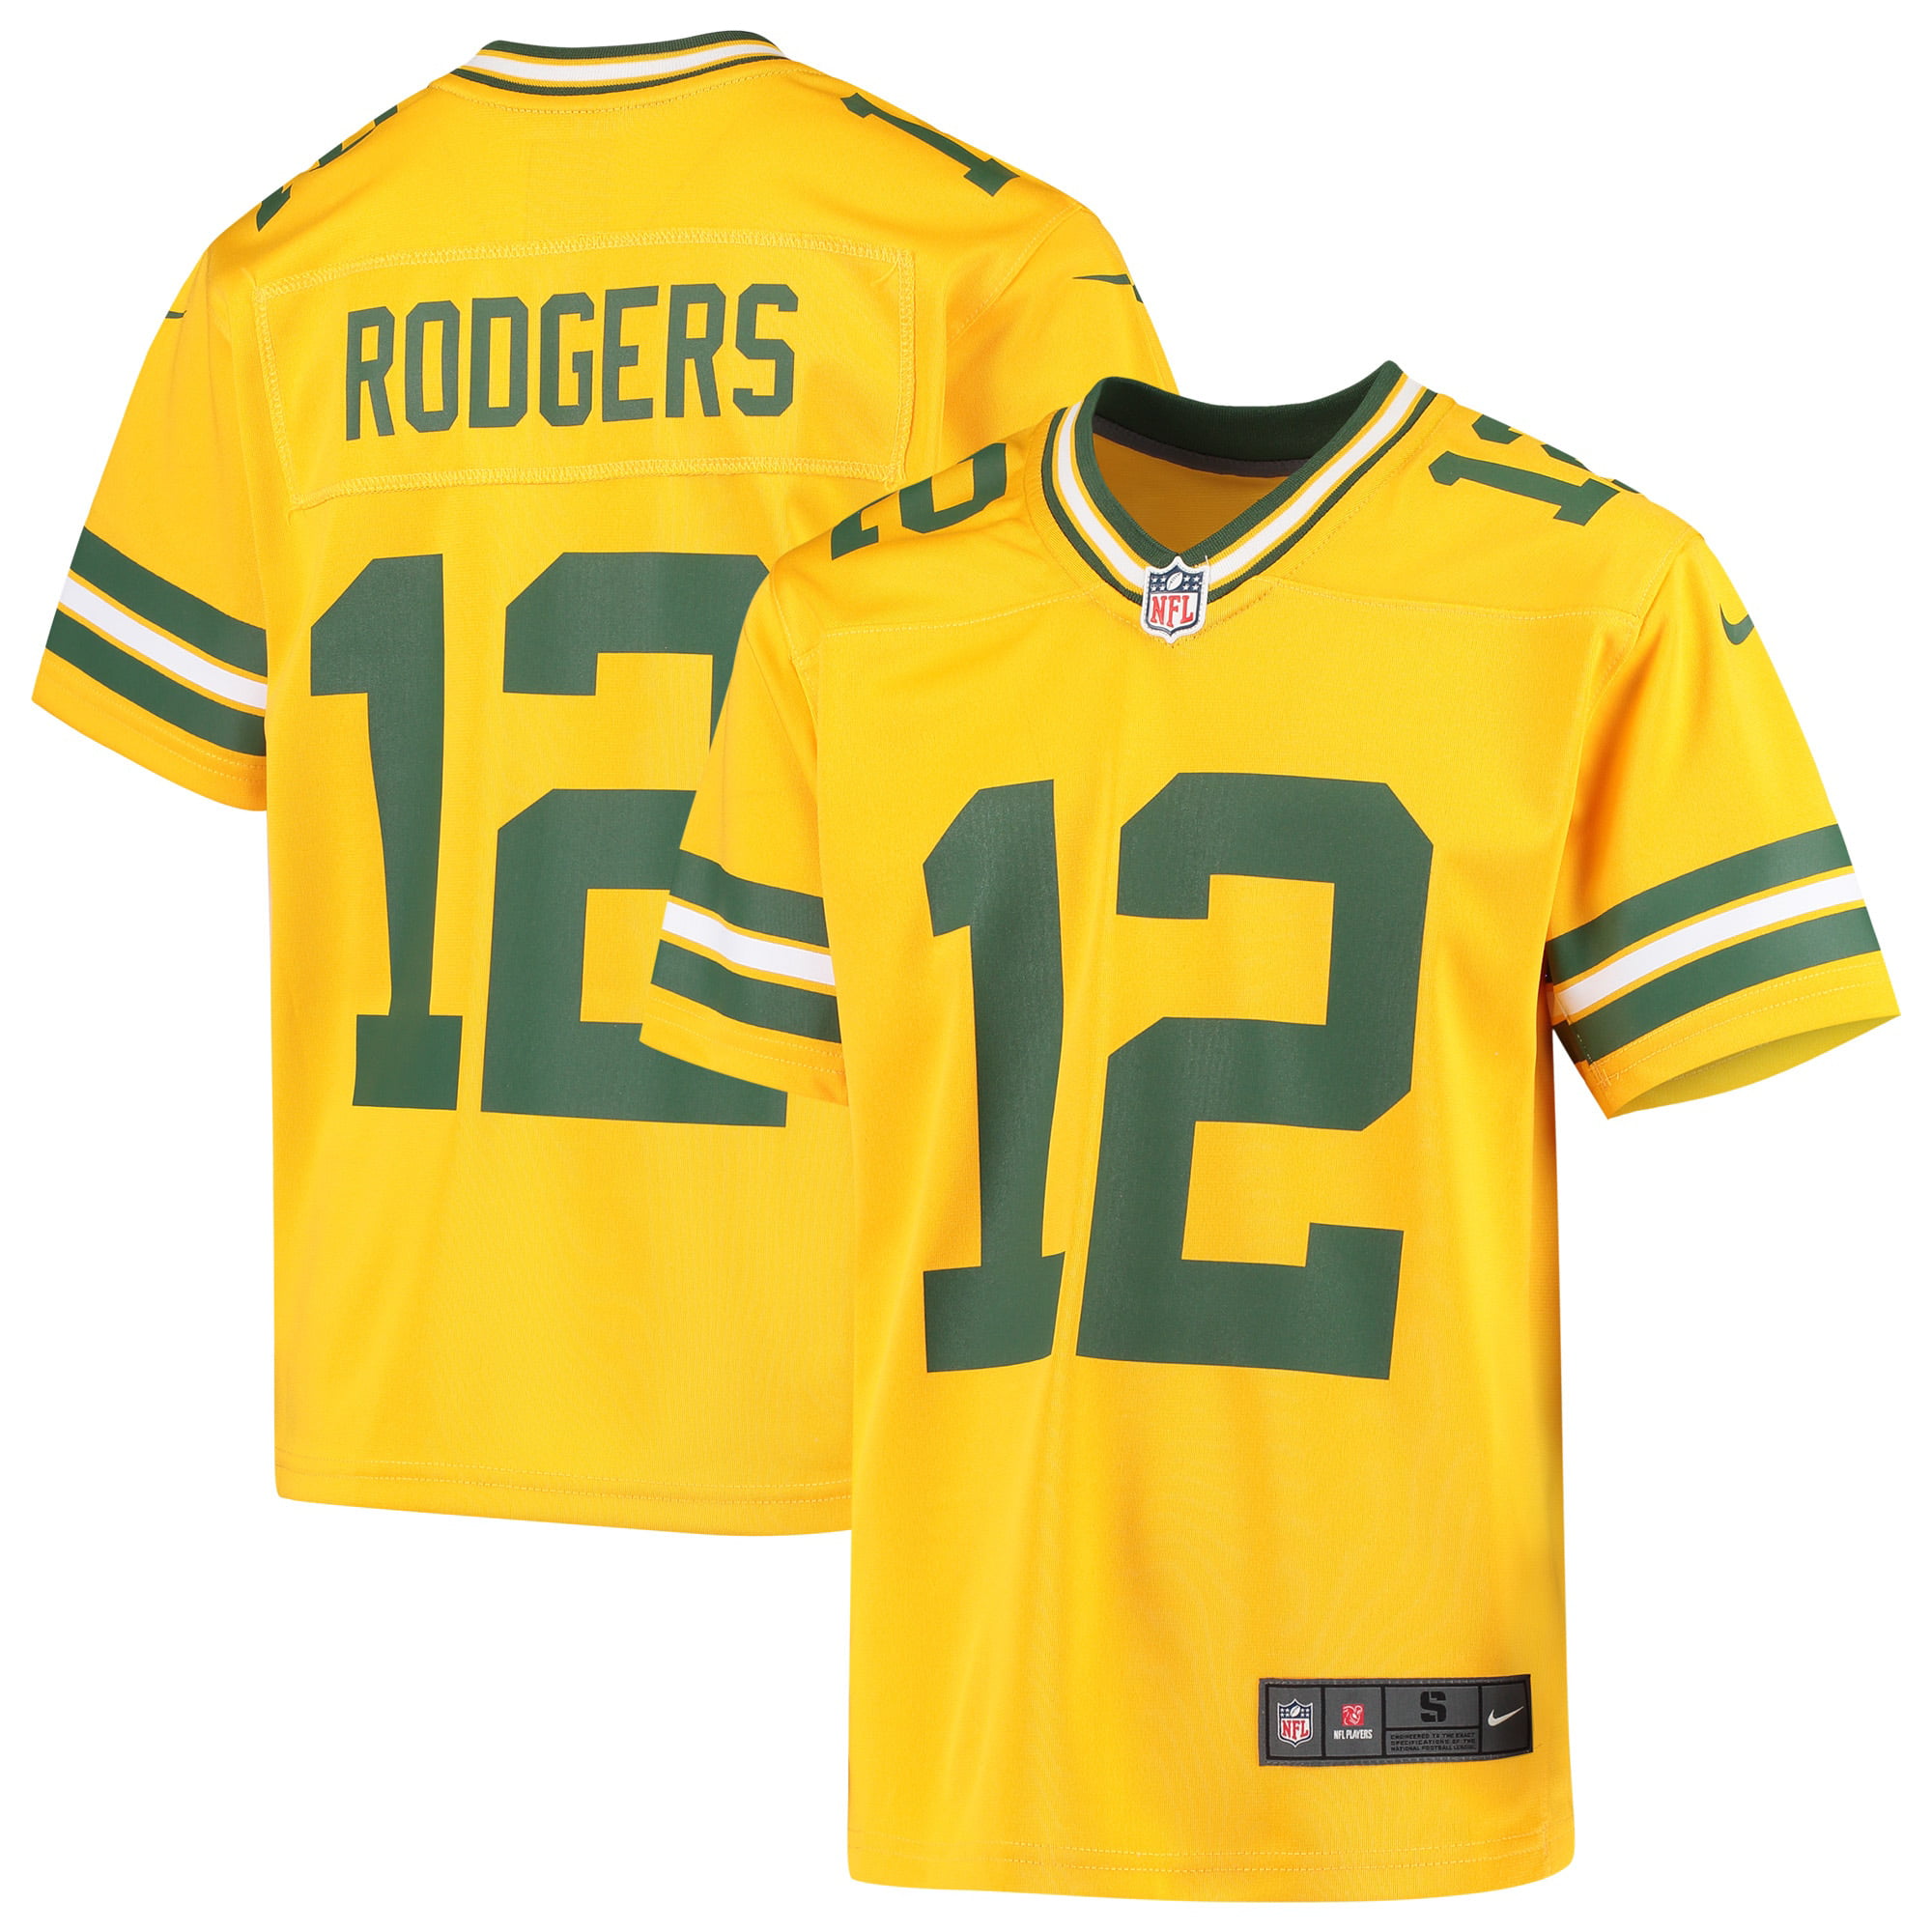 Aaron Rodgers Green Bay Packers Nike 